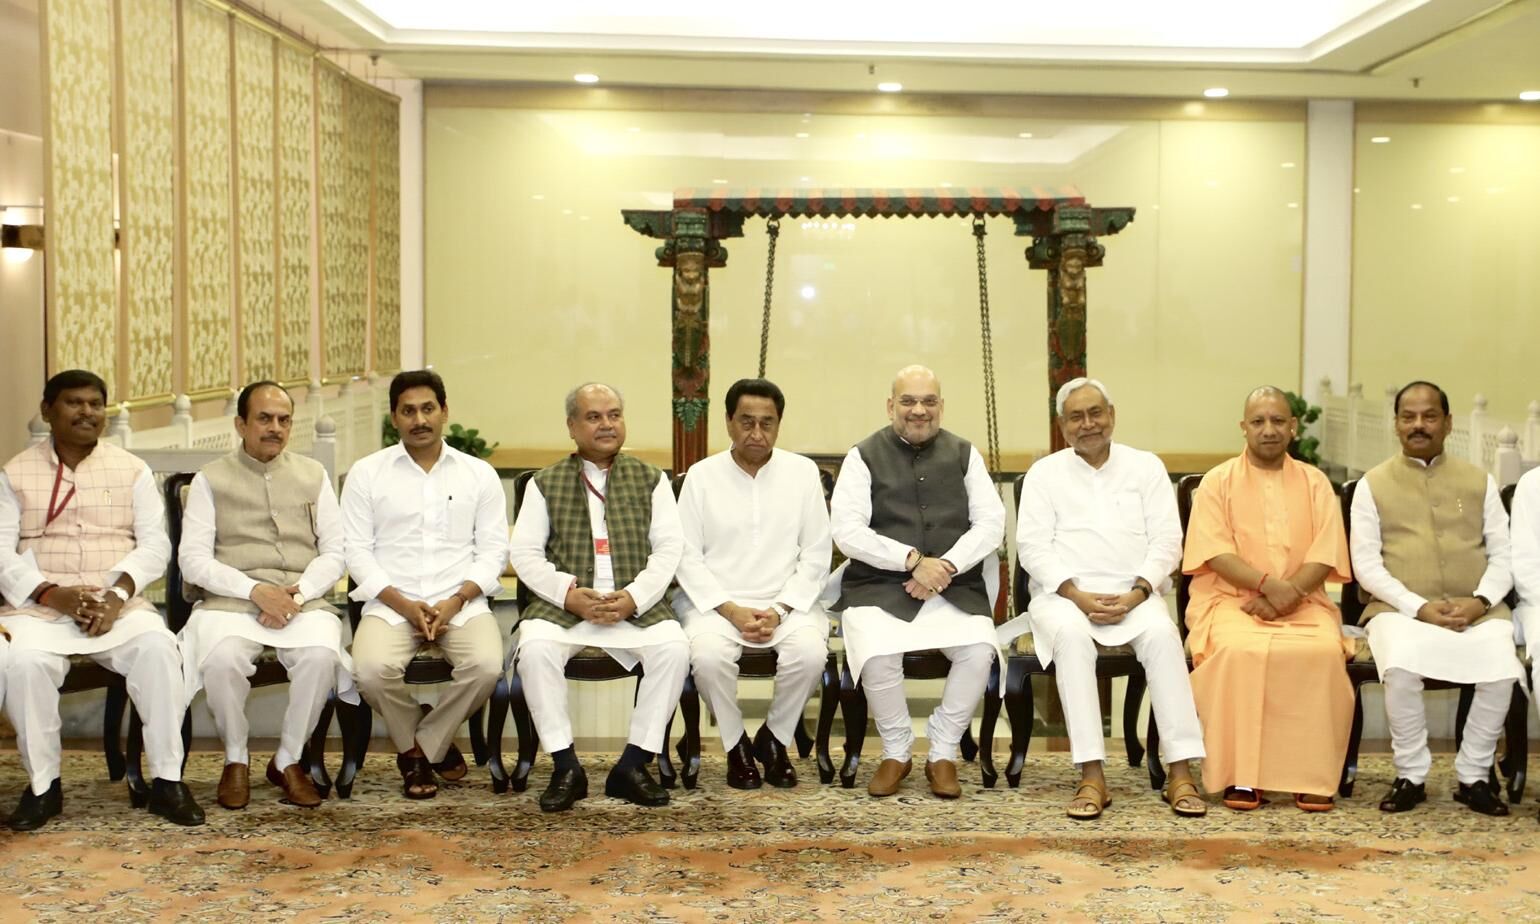 The Union Home Minister Amit Shah in a group photograph, during the review meeting on security issues with the Chief Ministers of Left Wing Extremism (LWE) affected states, in New Delhi